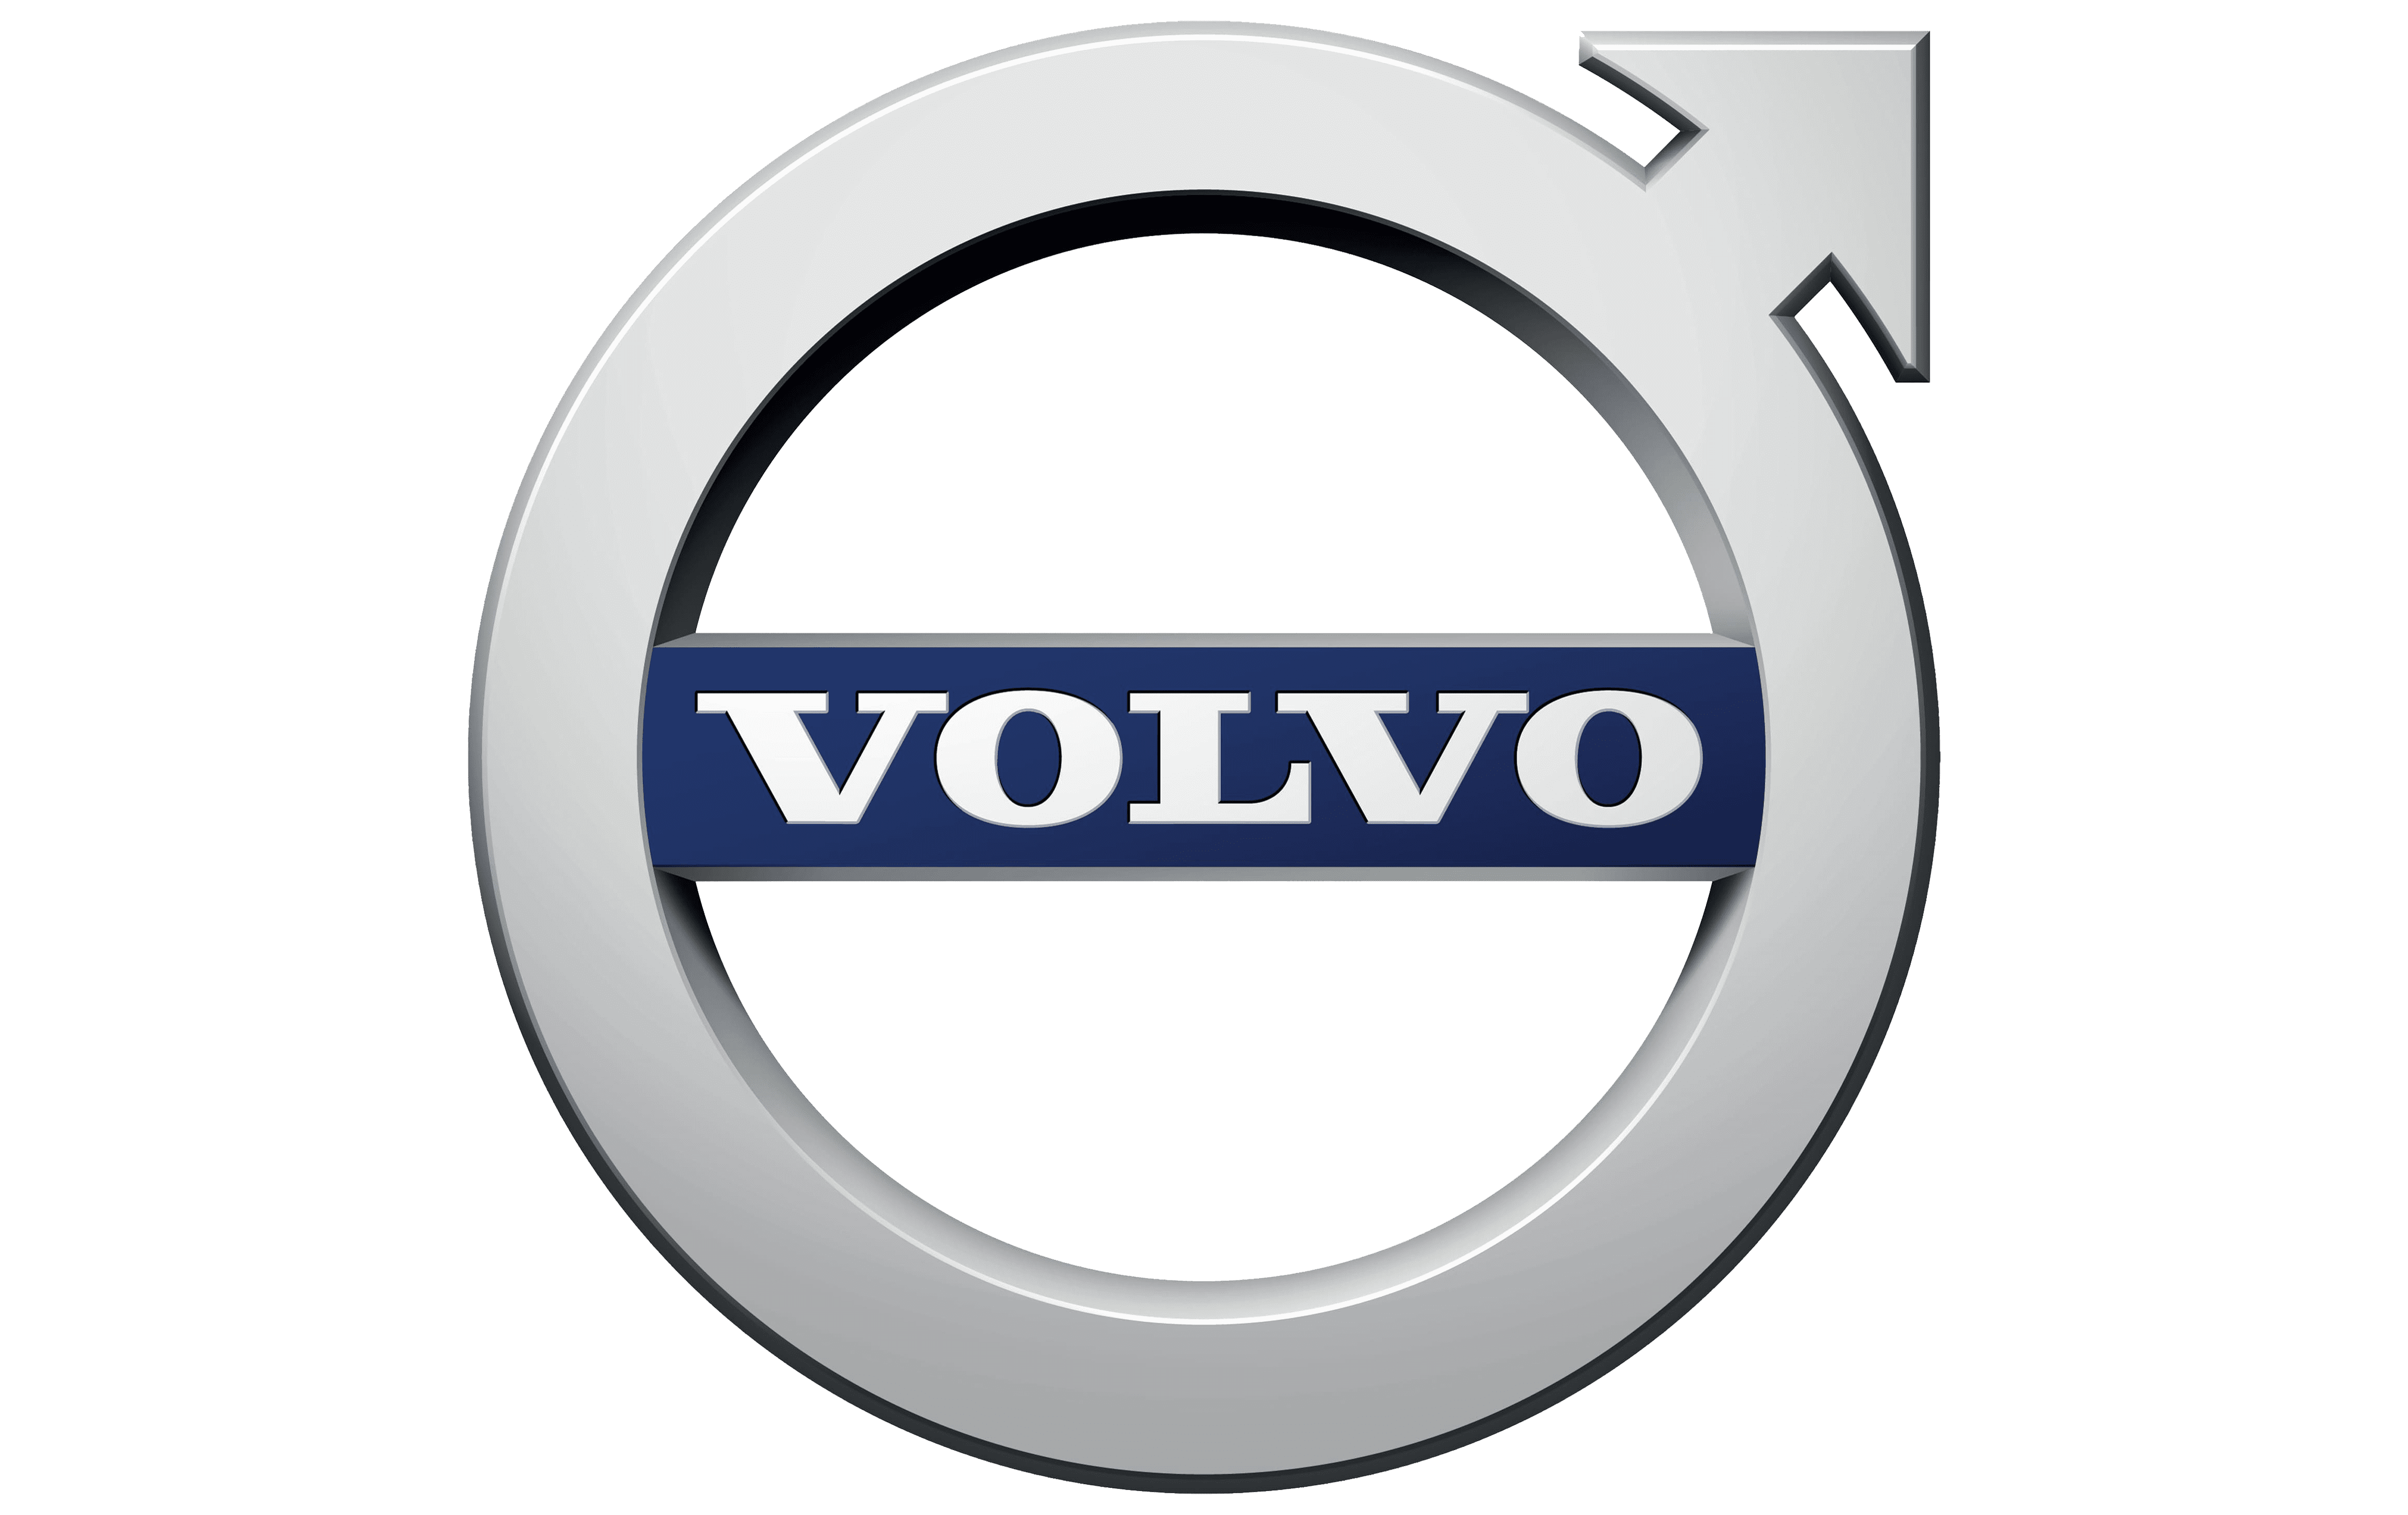 2021-volvo-v60-cross-country-incentives-specials-offers-in